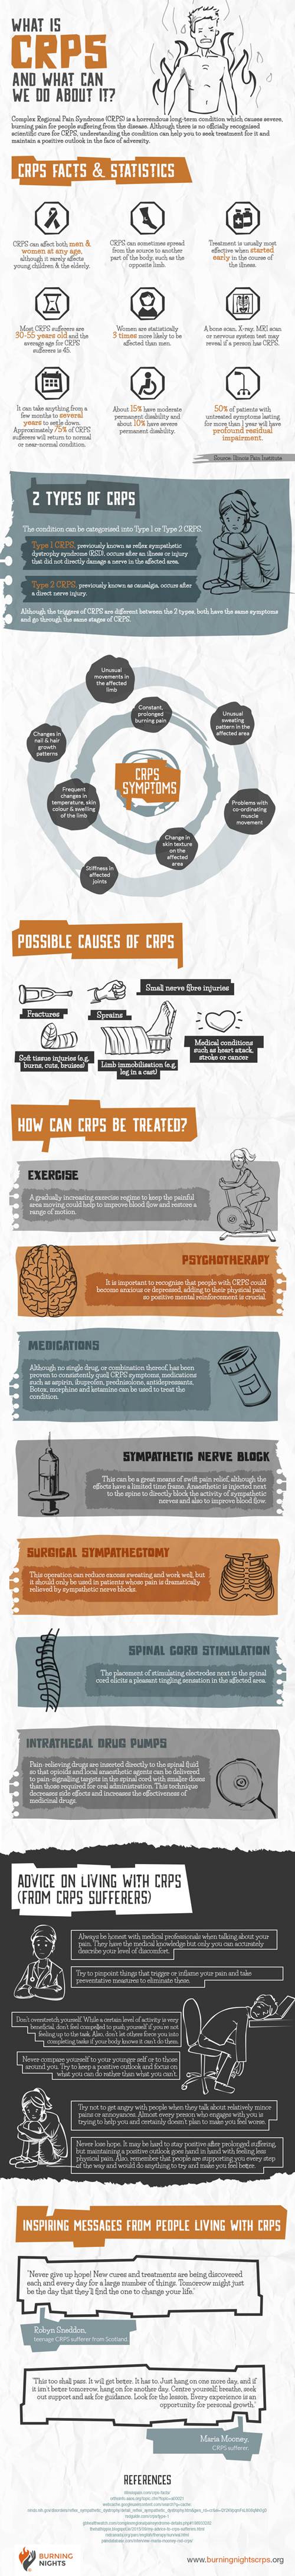 What is CRPS and What Can We Do About It-Infographic